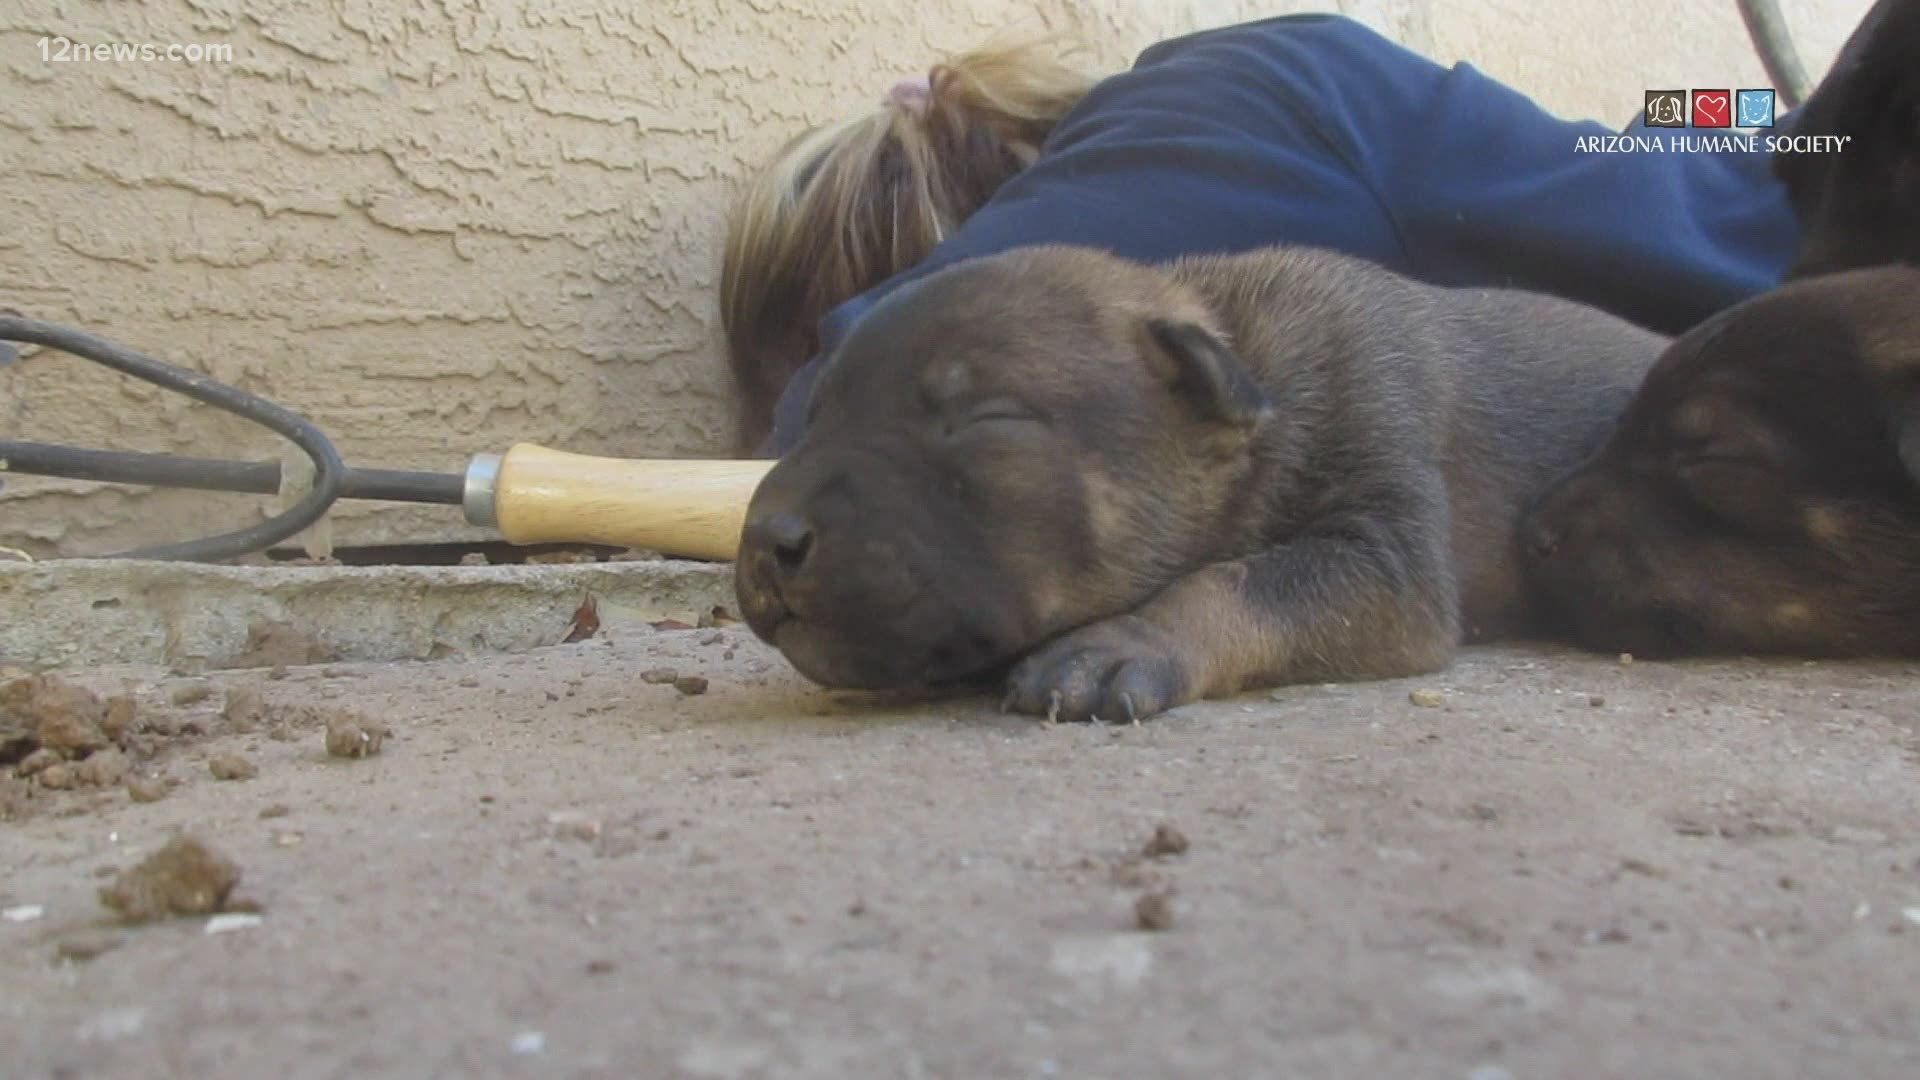 A litter of seven puppies and their mother were rescued by the Arizona Humane Society after work crews saw a dog go underneath the foundation of a home.